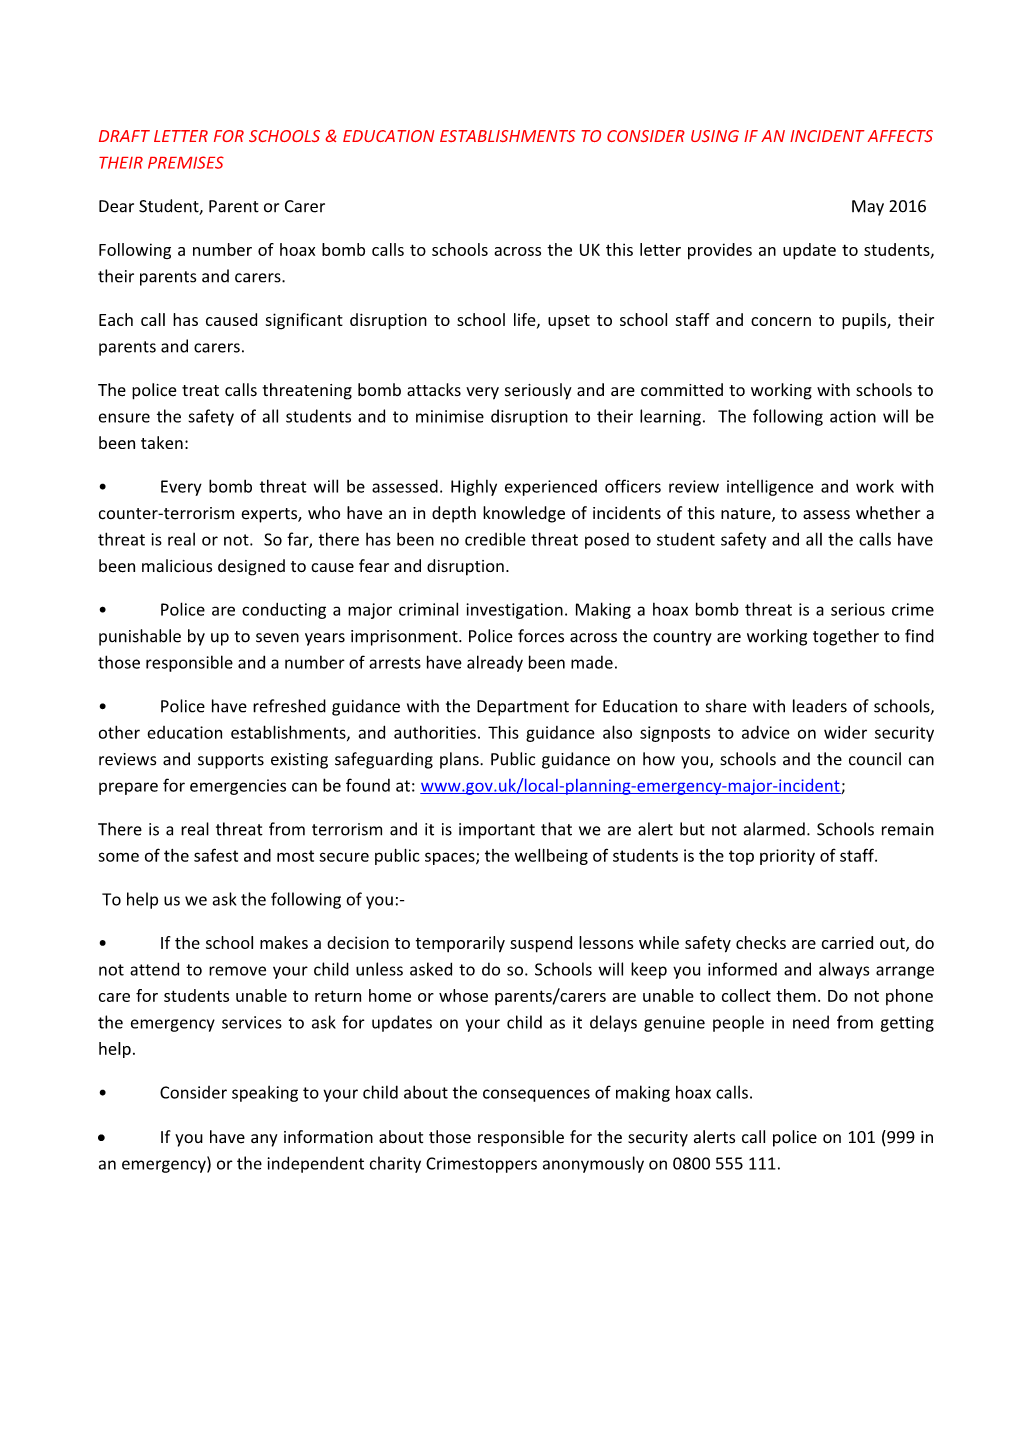 Draft Letter for Schools & Education Establishments to Consider Using If an Incident Affects